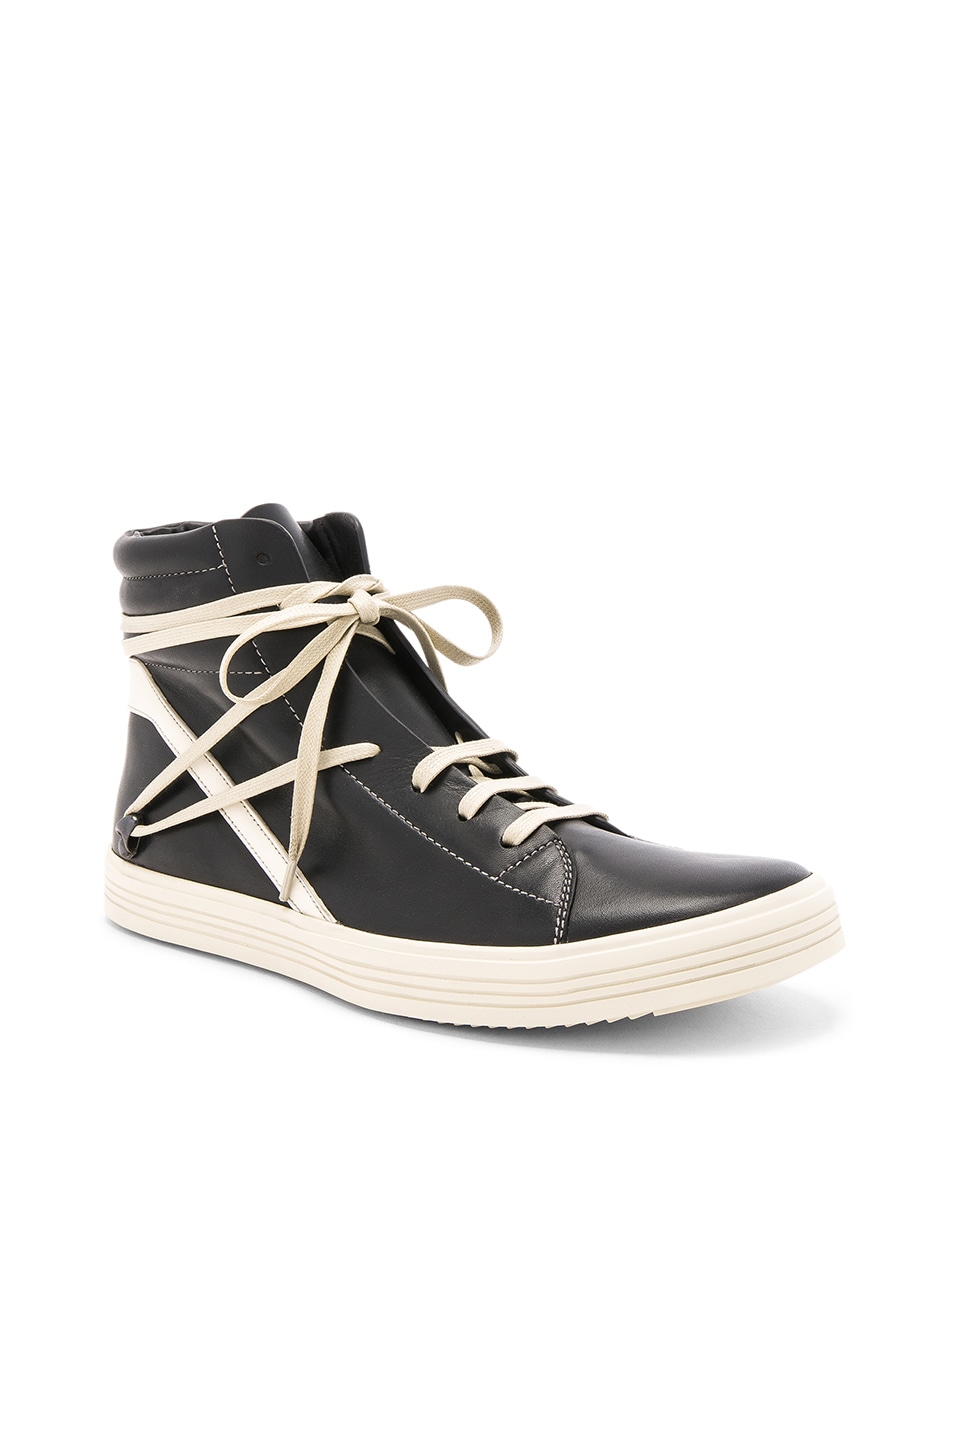 Image 1 of Rick Owens Leather Thrasher Sneakers in Black